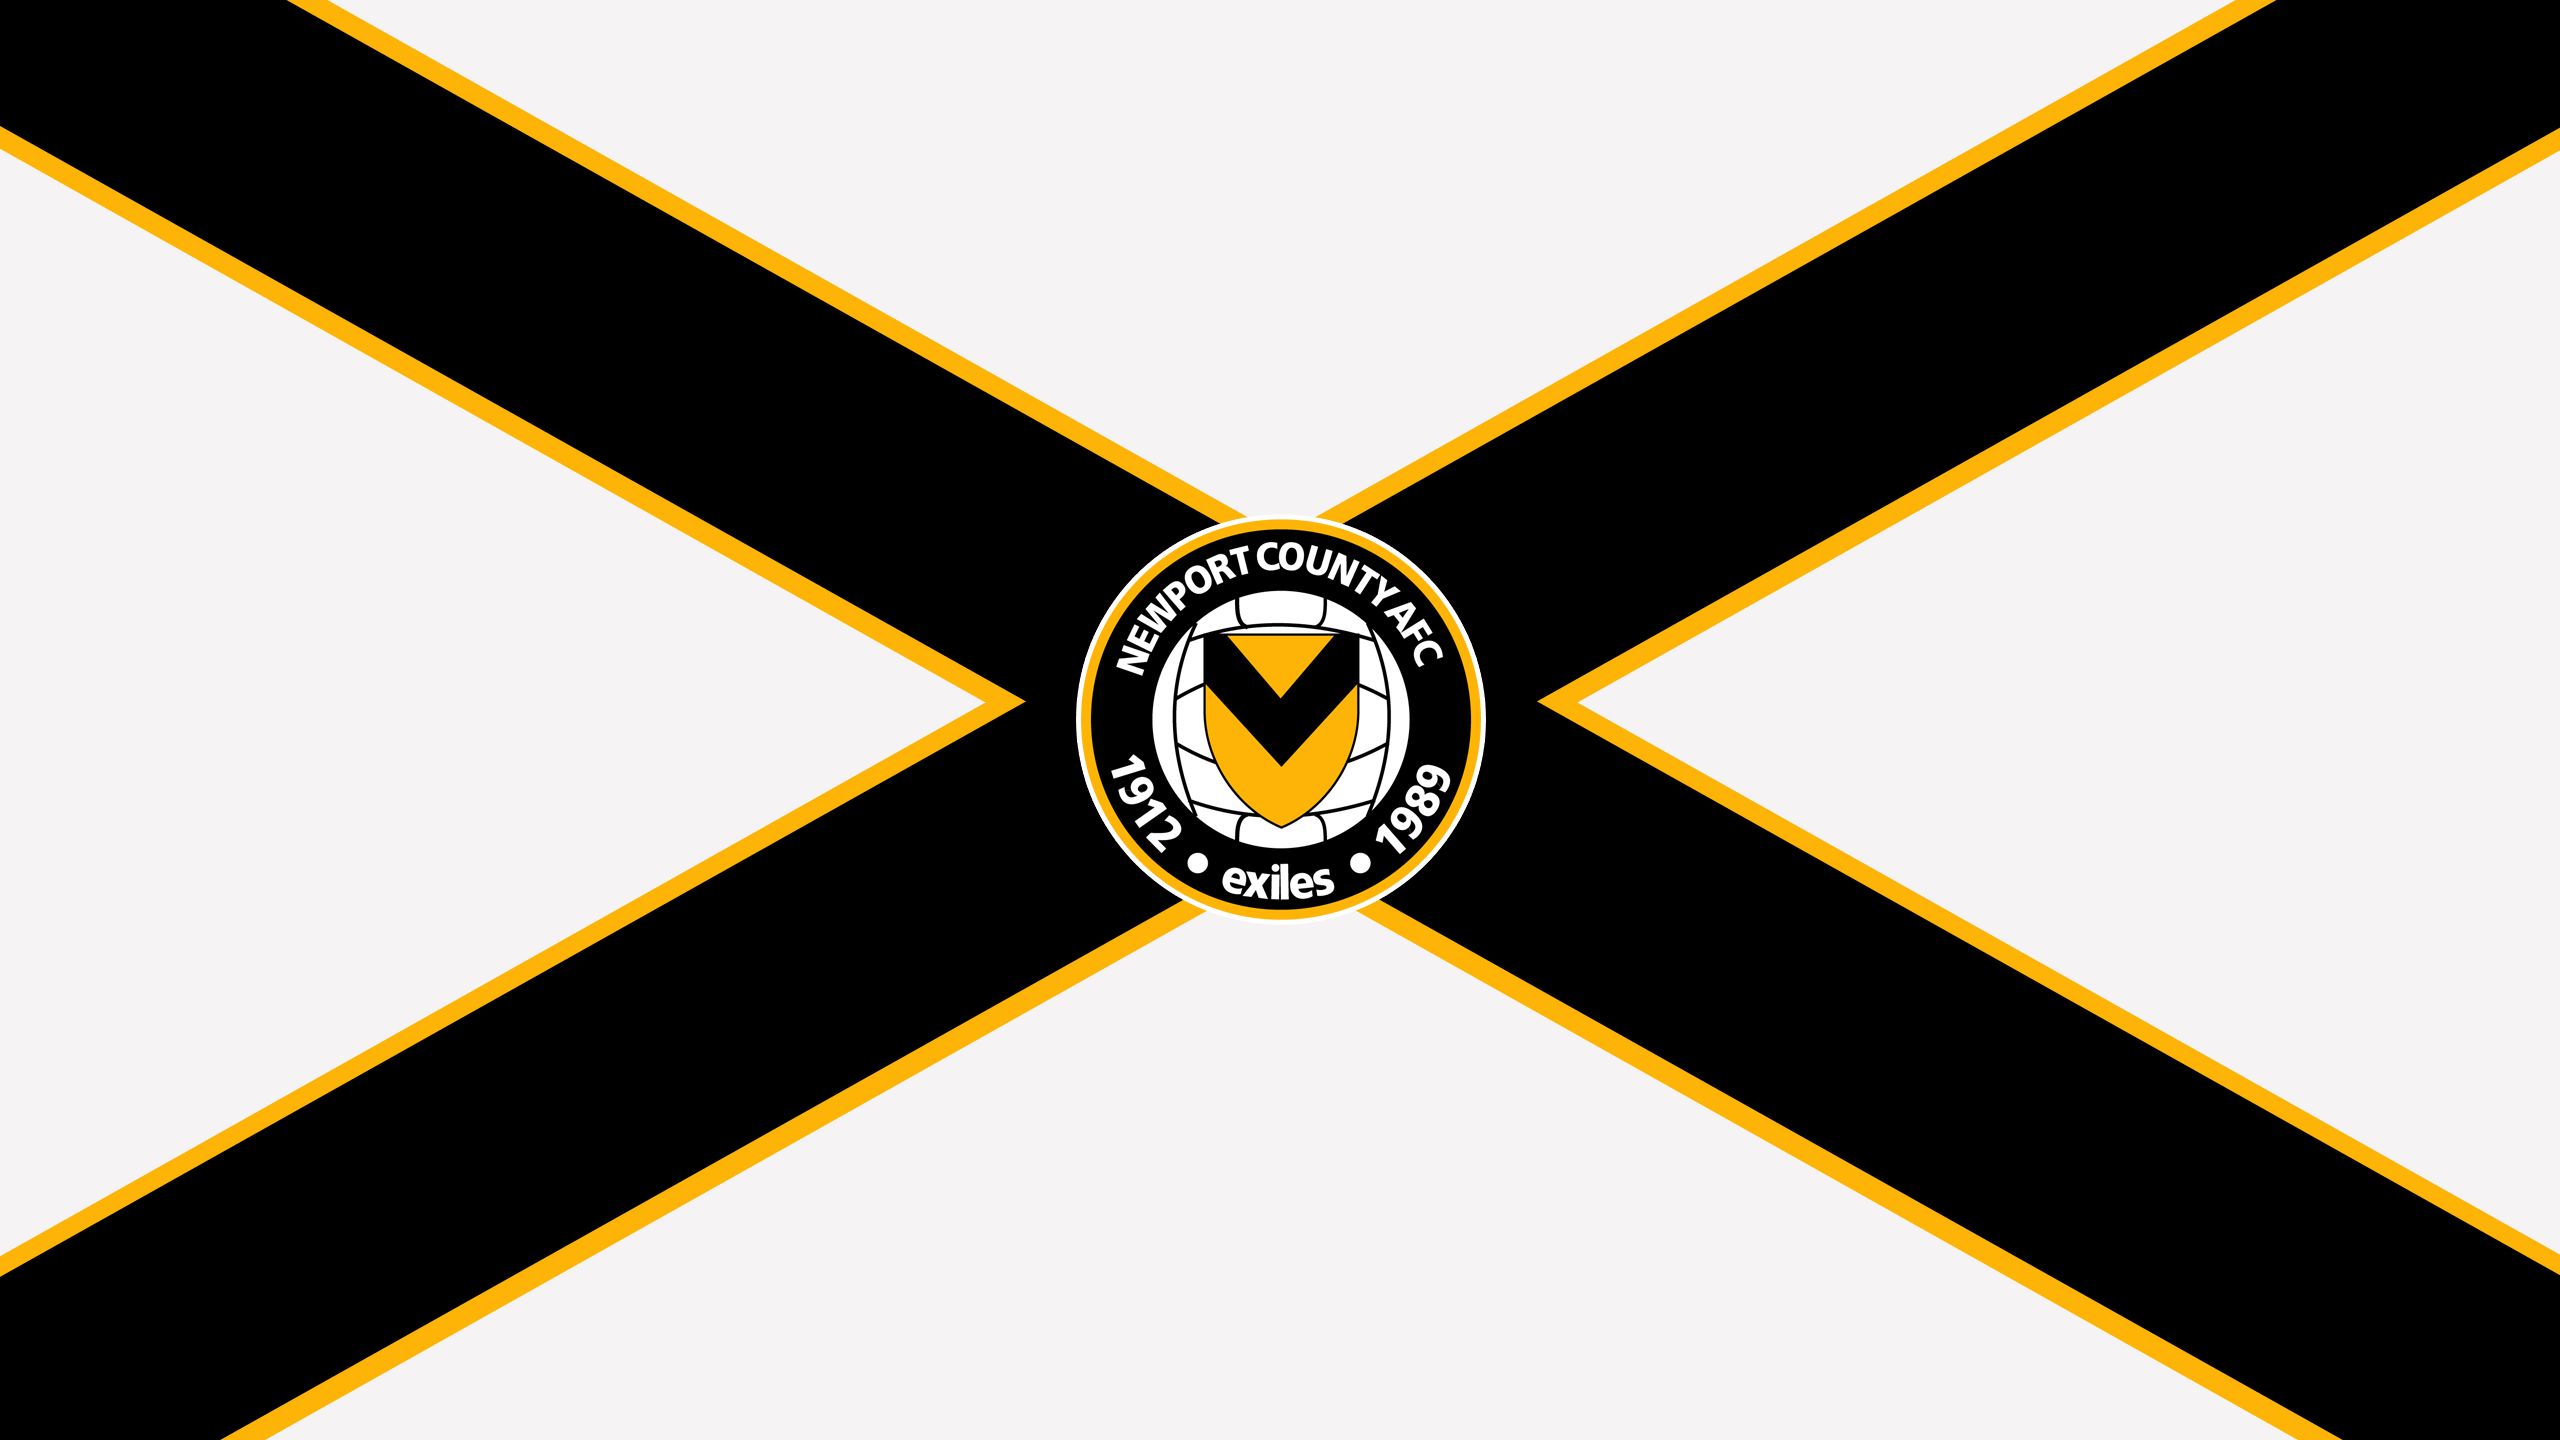 Popular Newport County A F C Image for Phone